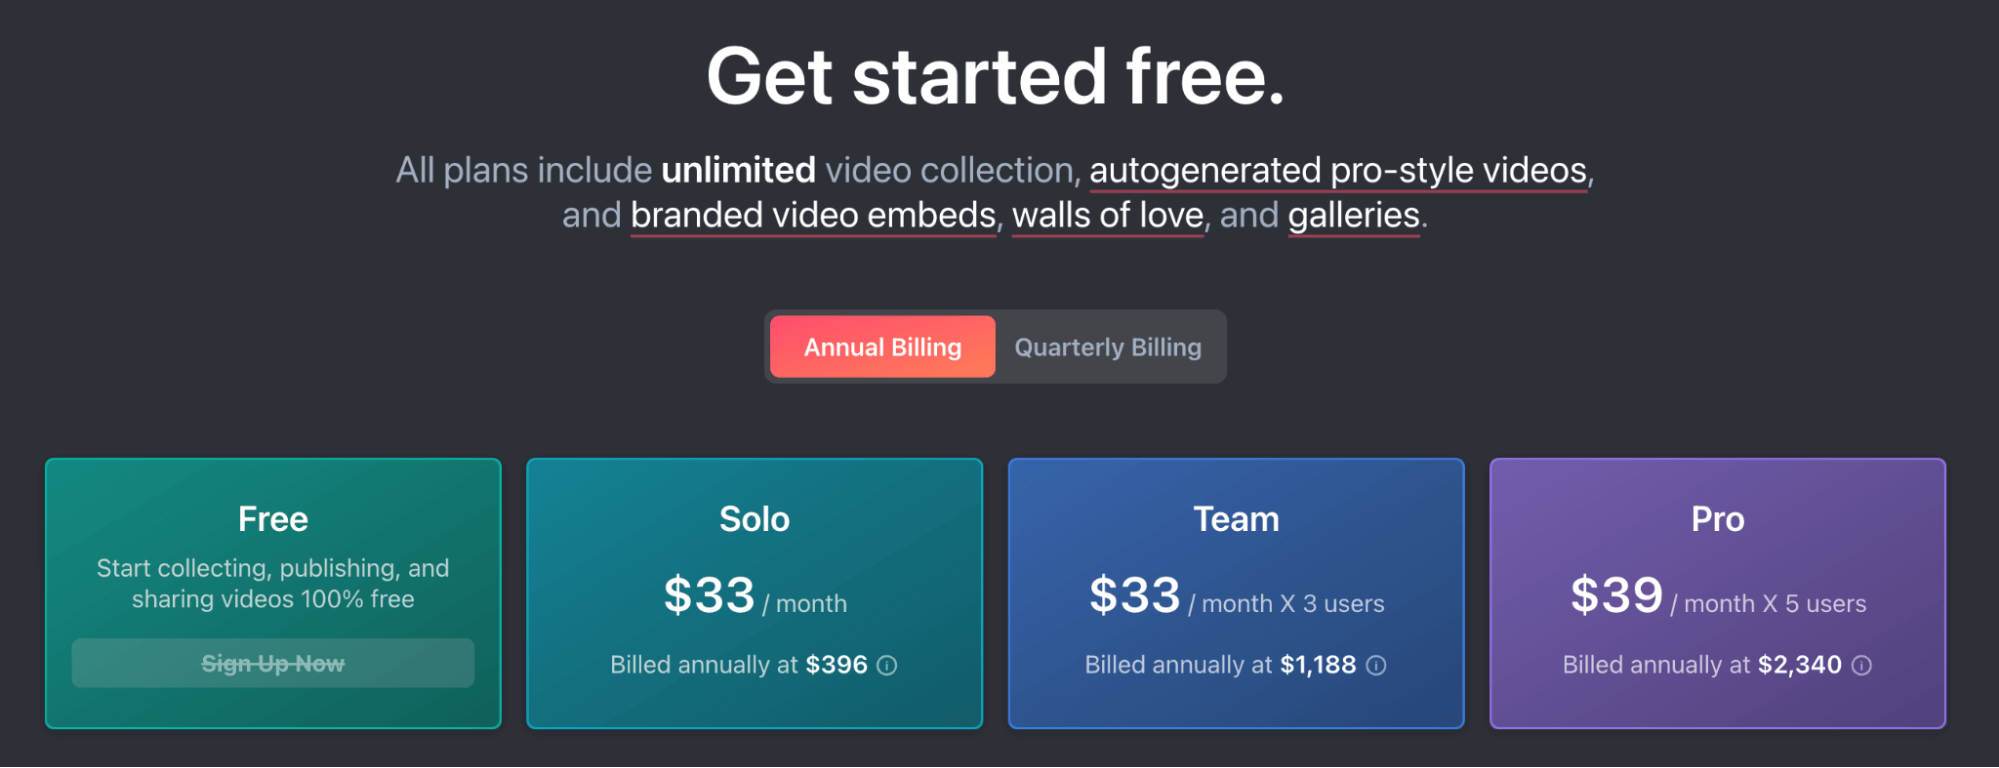 Get started free. 